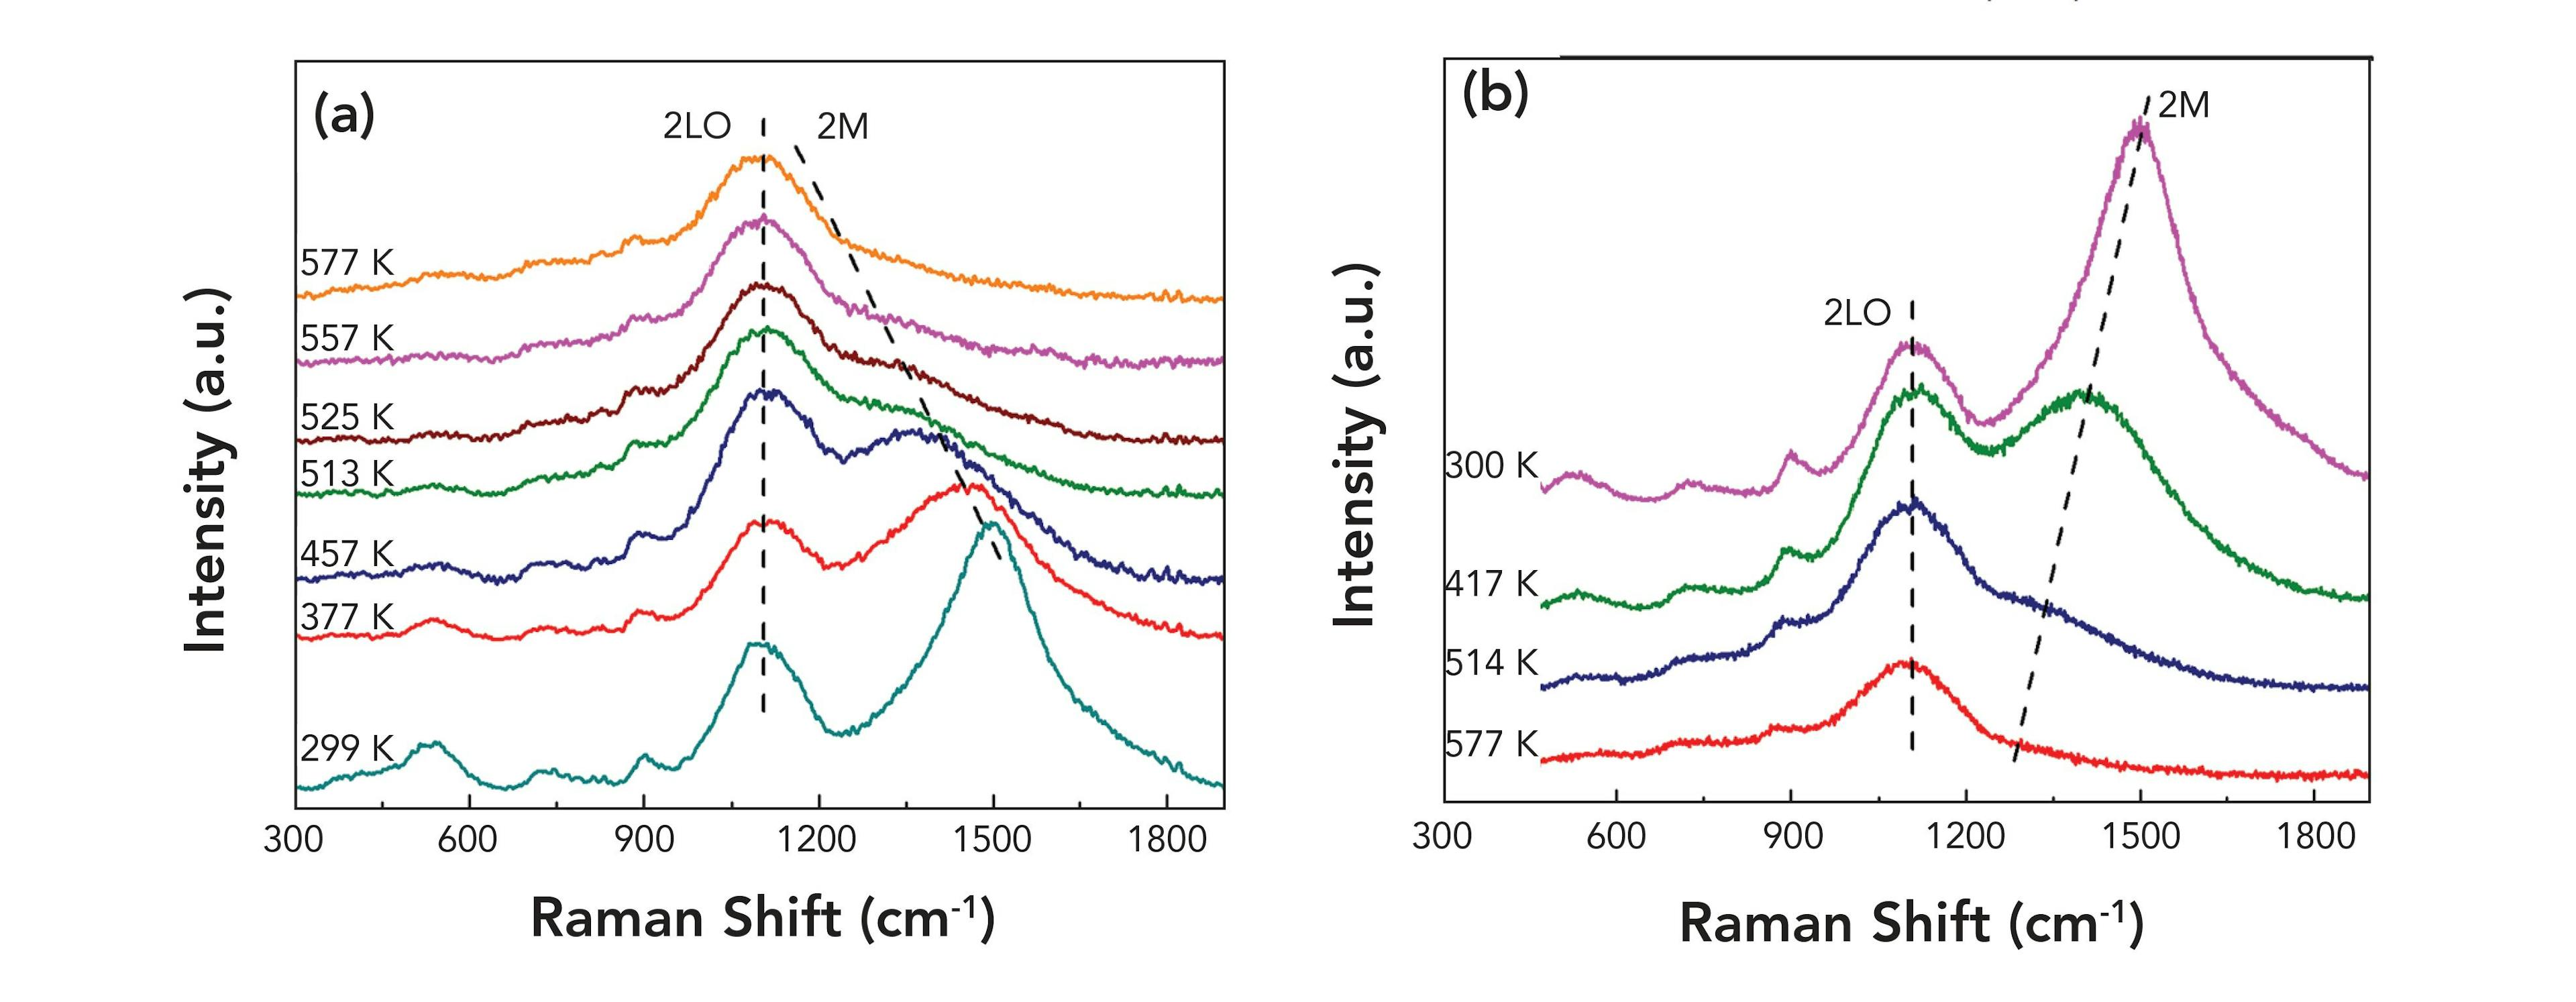 FIGURE 11: Evolution of the Raman spectrum of NiO at different temperatures; (a) heating and (b) cooling. Adapted from (11) for comparison purposes. Reproduced from M. M. Lacerda, et al, Appl. Phys. Lett. 110, 202406 (2017); doi: 10.1063/1.4983810, with the permission of AIP Publishing.